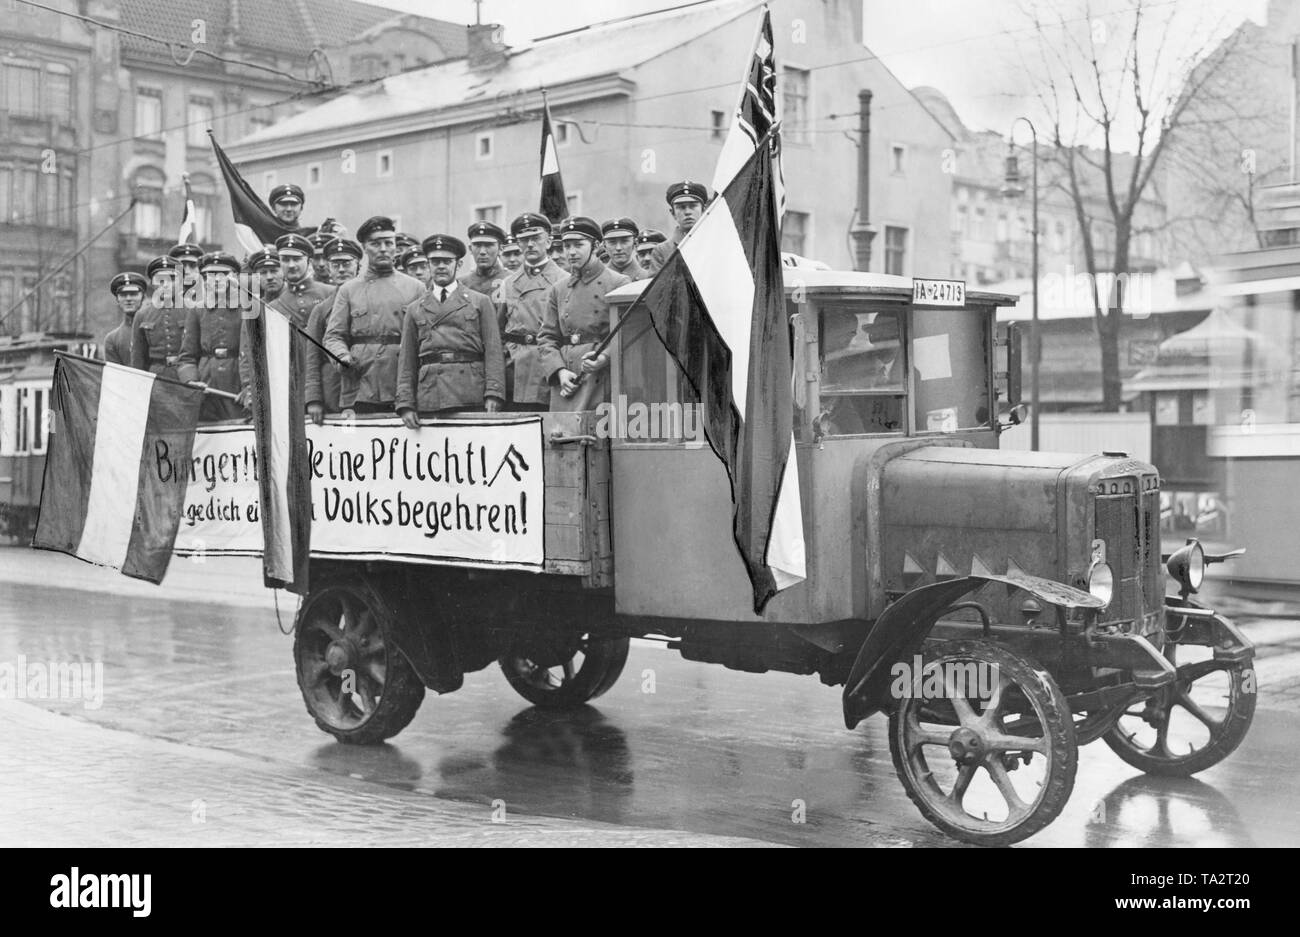 In 1931 the Stahlhelm, together with other right-wing conservative forces, tried to dissolve the Prussian Diet by means of a plebiscite. For this purpose, propaganda cars like this truck were also used. On the banner is the call 'Citizens, do your duty! Participate in the referendum'. Stock Photo